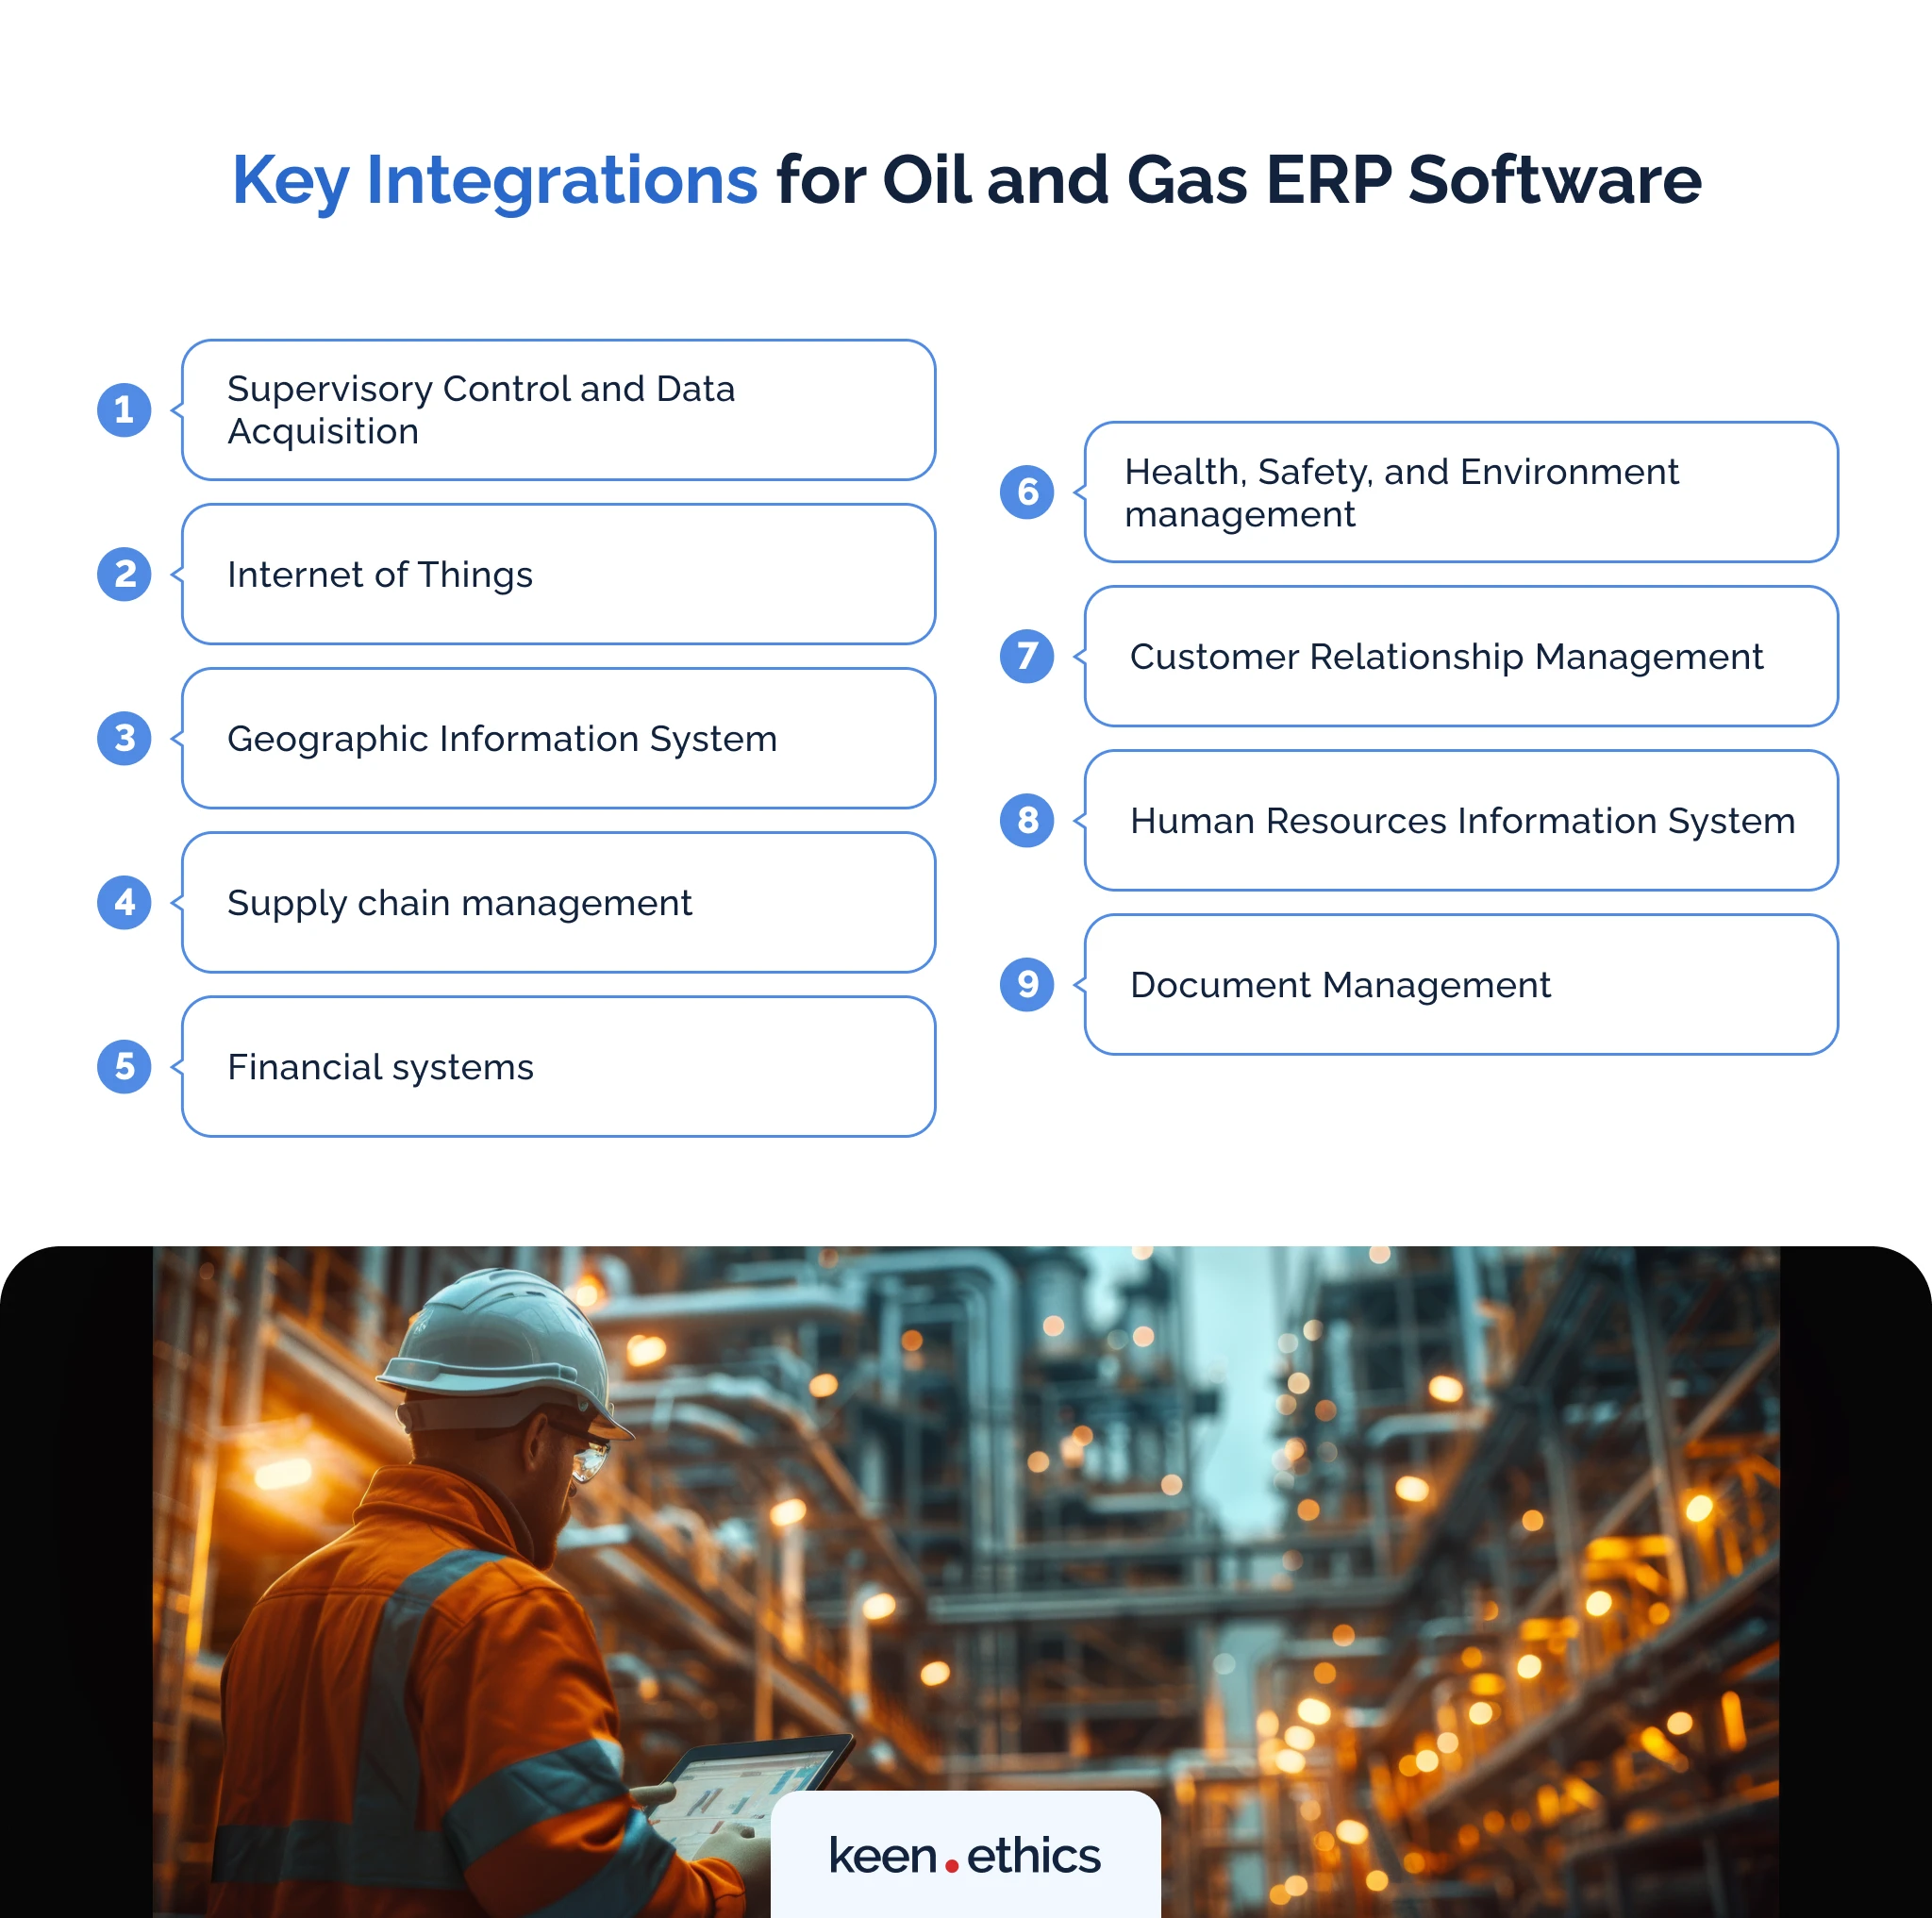 Key integrations for oil and gas ERP software